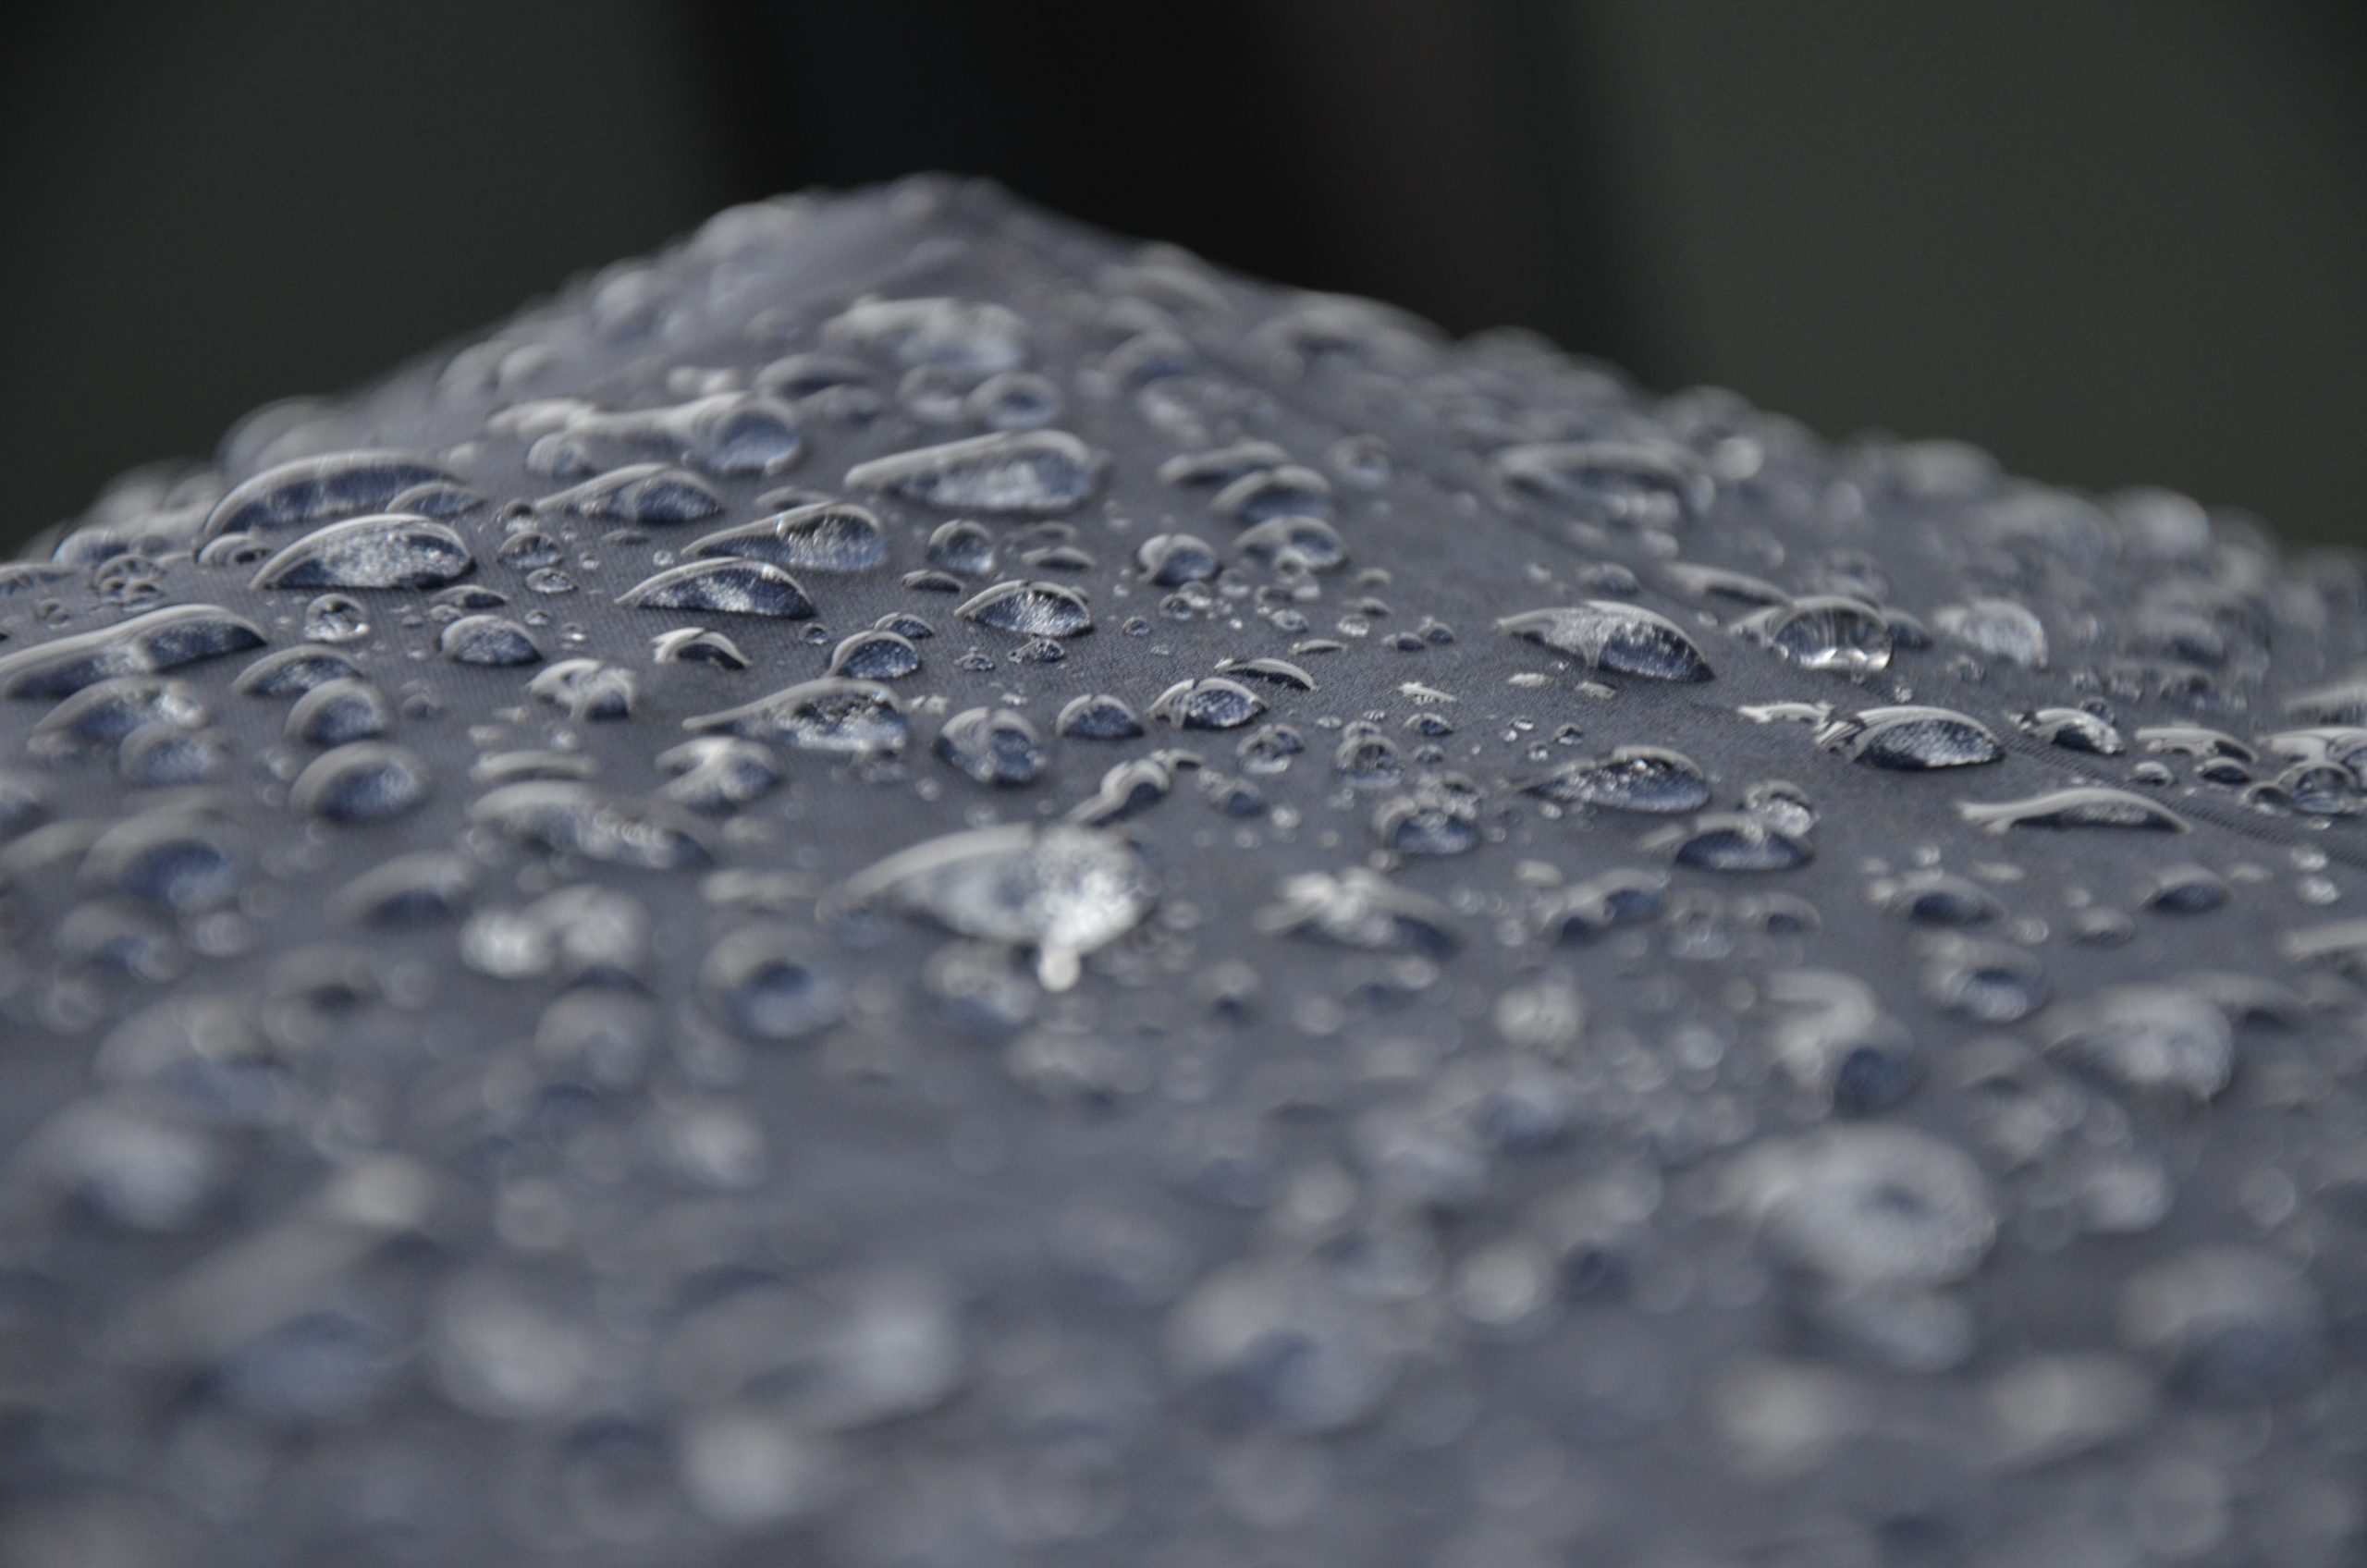 Water droplets on a grey surface